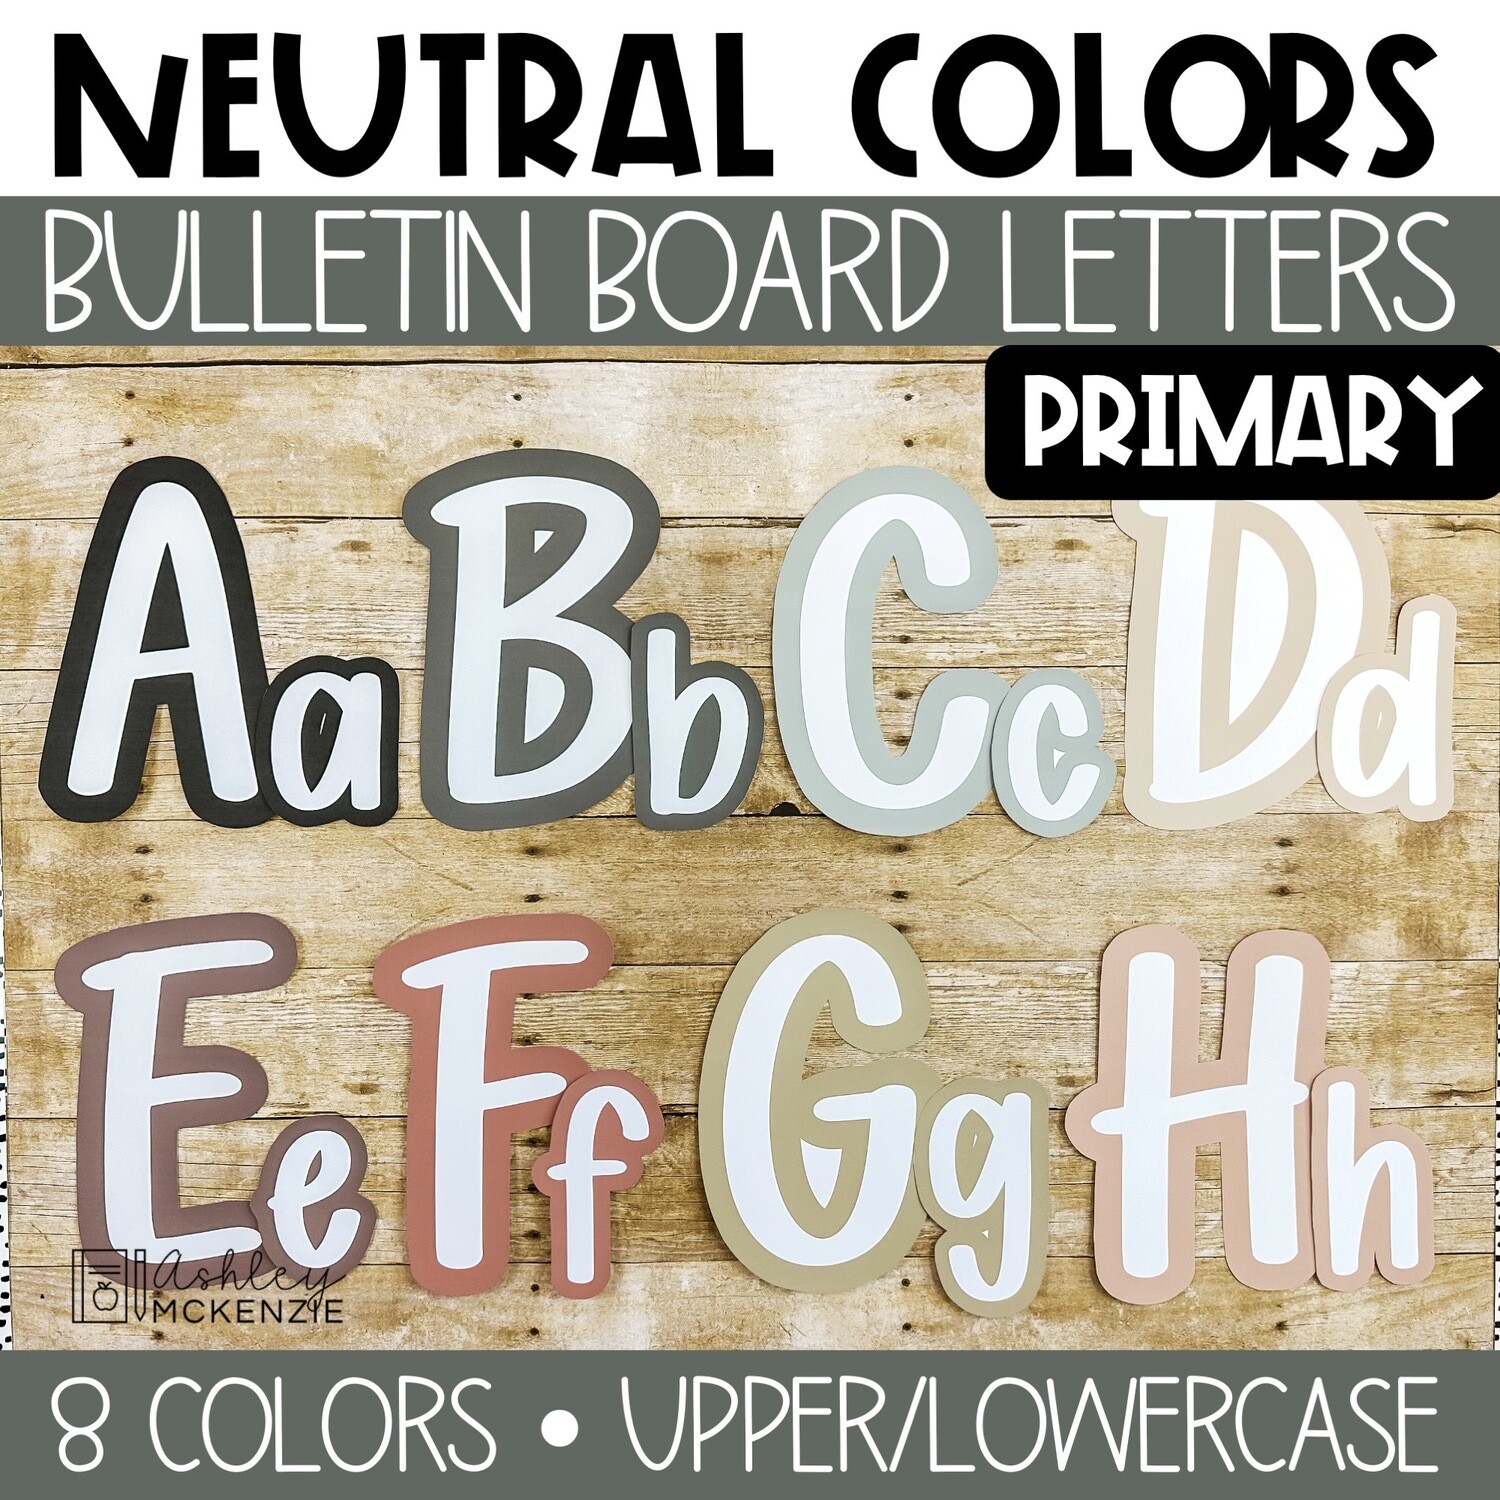 Neutral Colors Primary Font A-Z Bulletin Board Letters, Punctuation, and Numbers